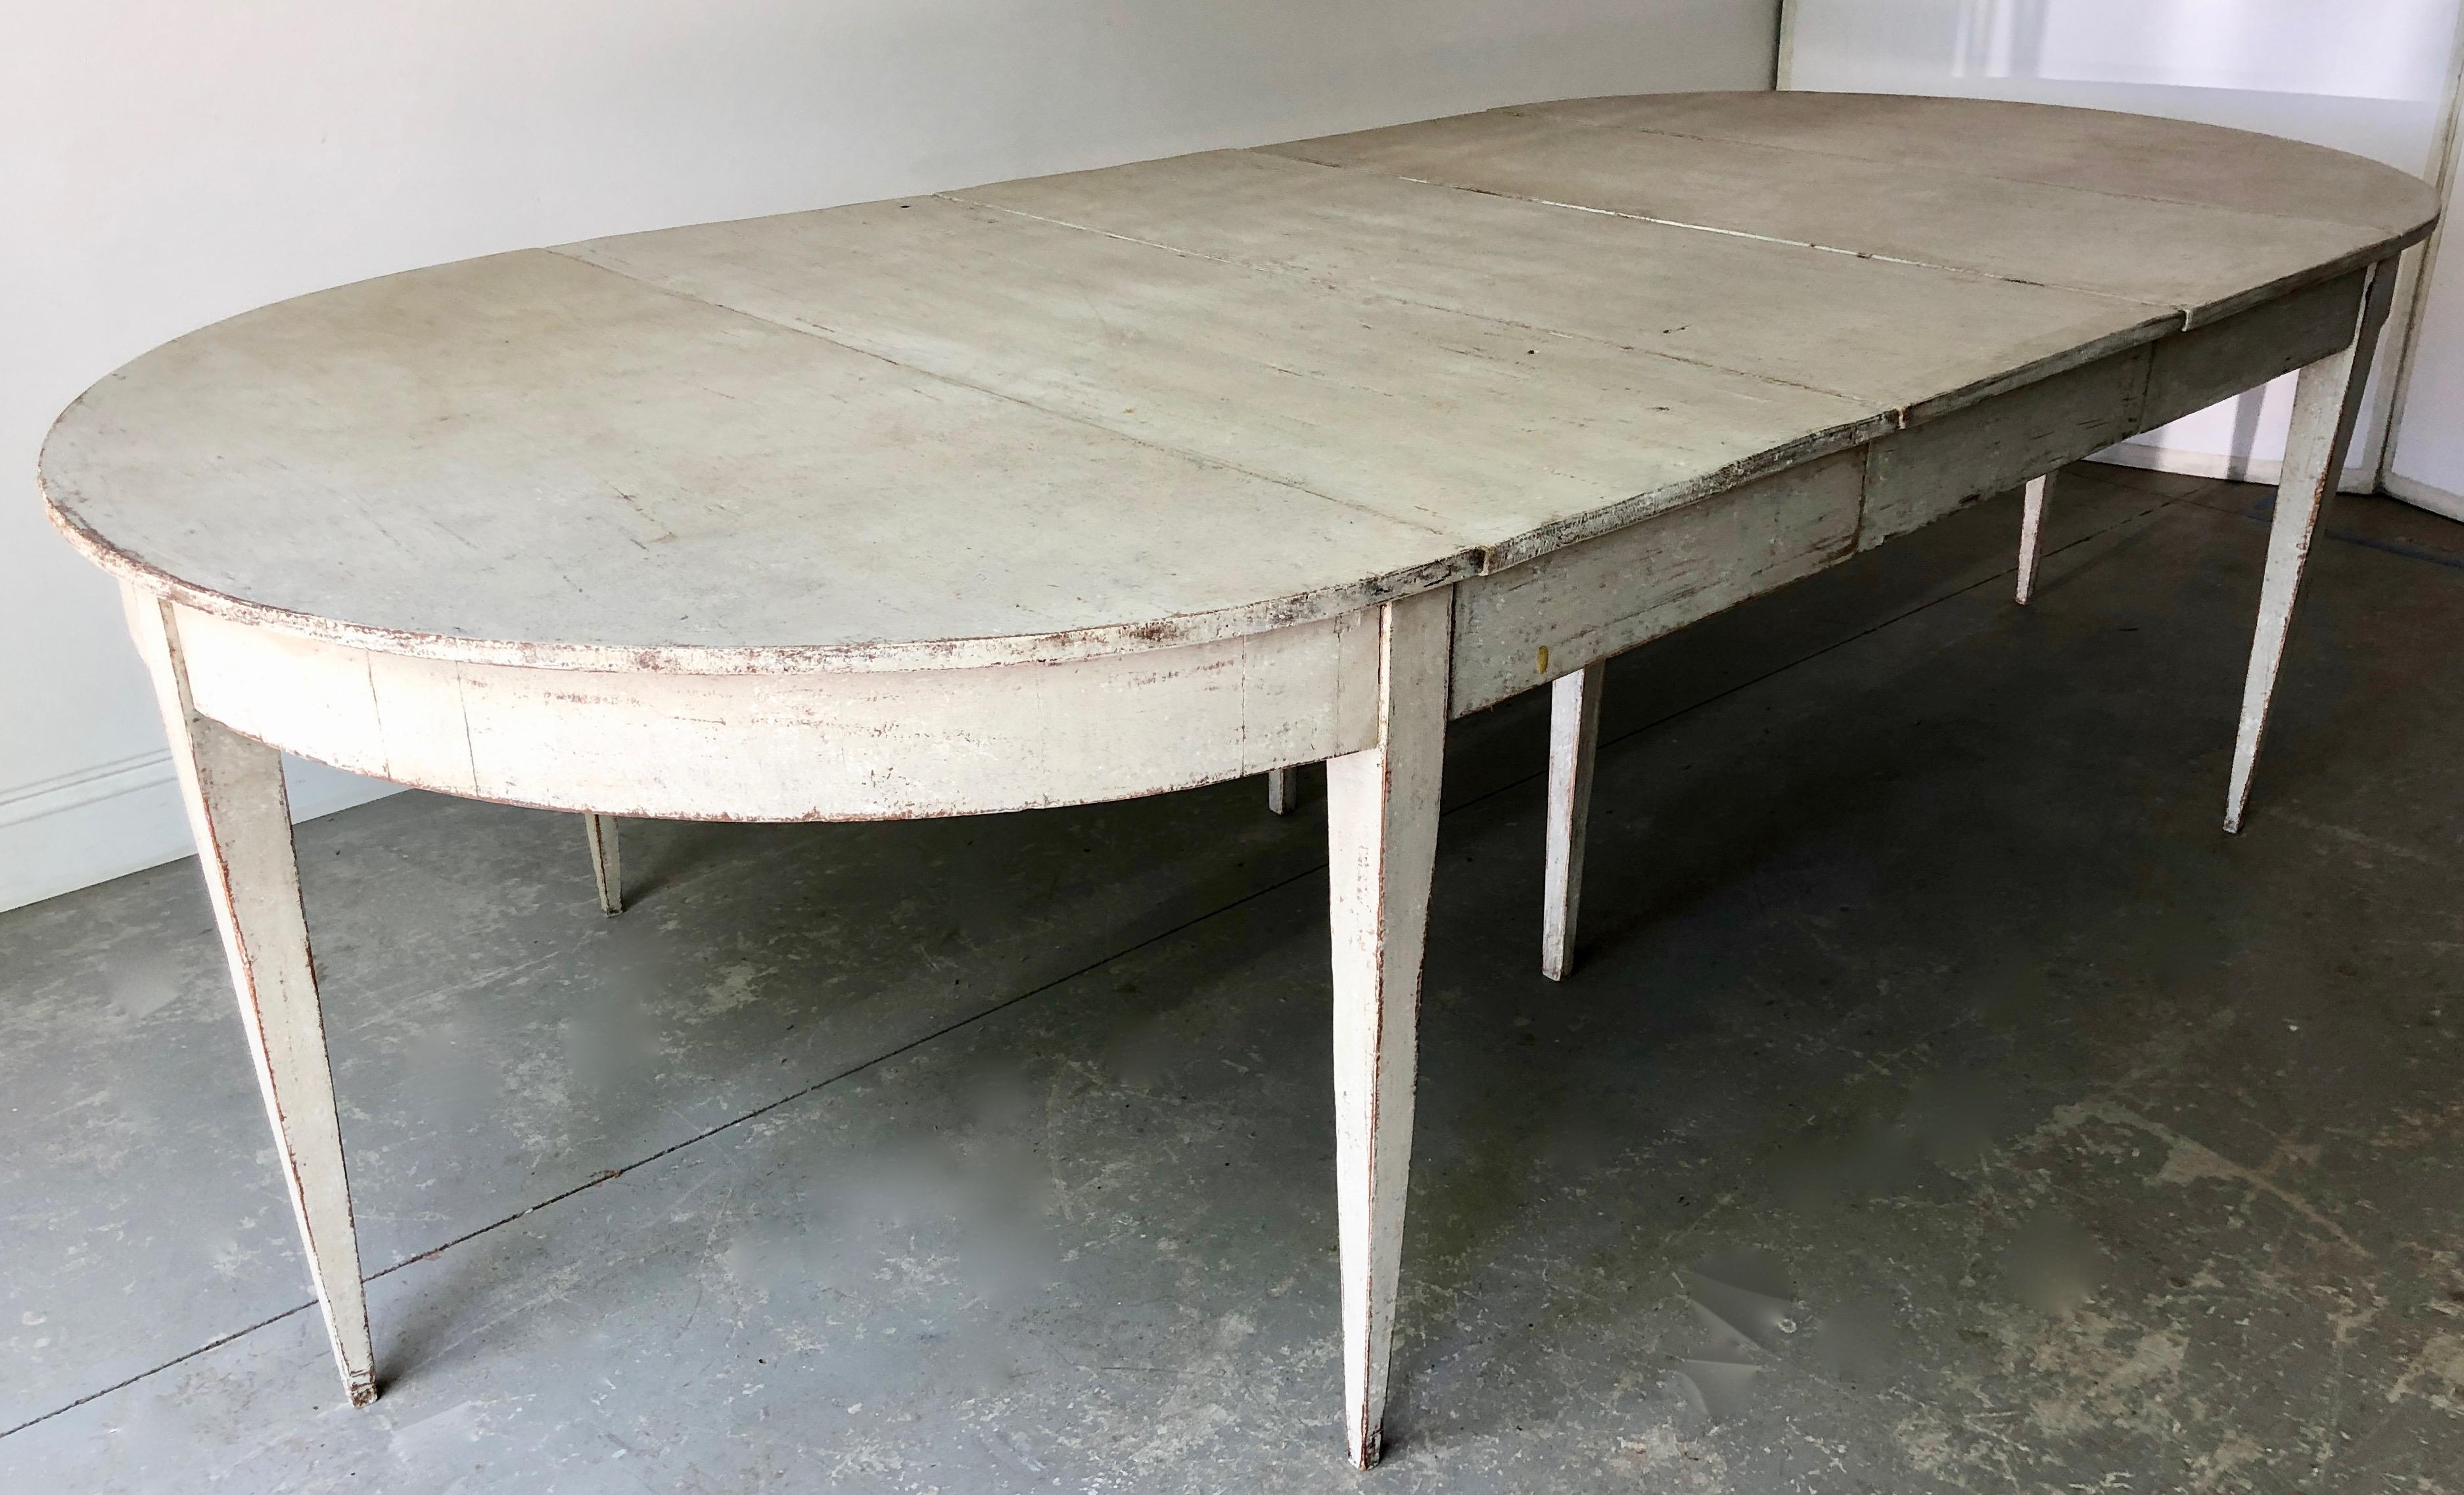 19th century painted Gustavian style extending table with three leaves and tapered legs. Paintwork later. A practical piece that can be used as round table or extended with one, two or three leaves up to 109.50